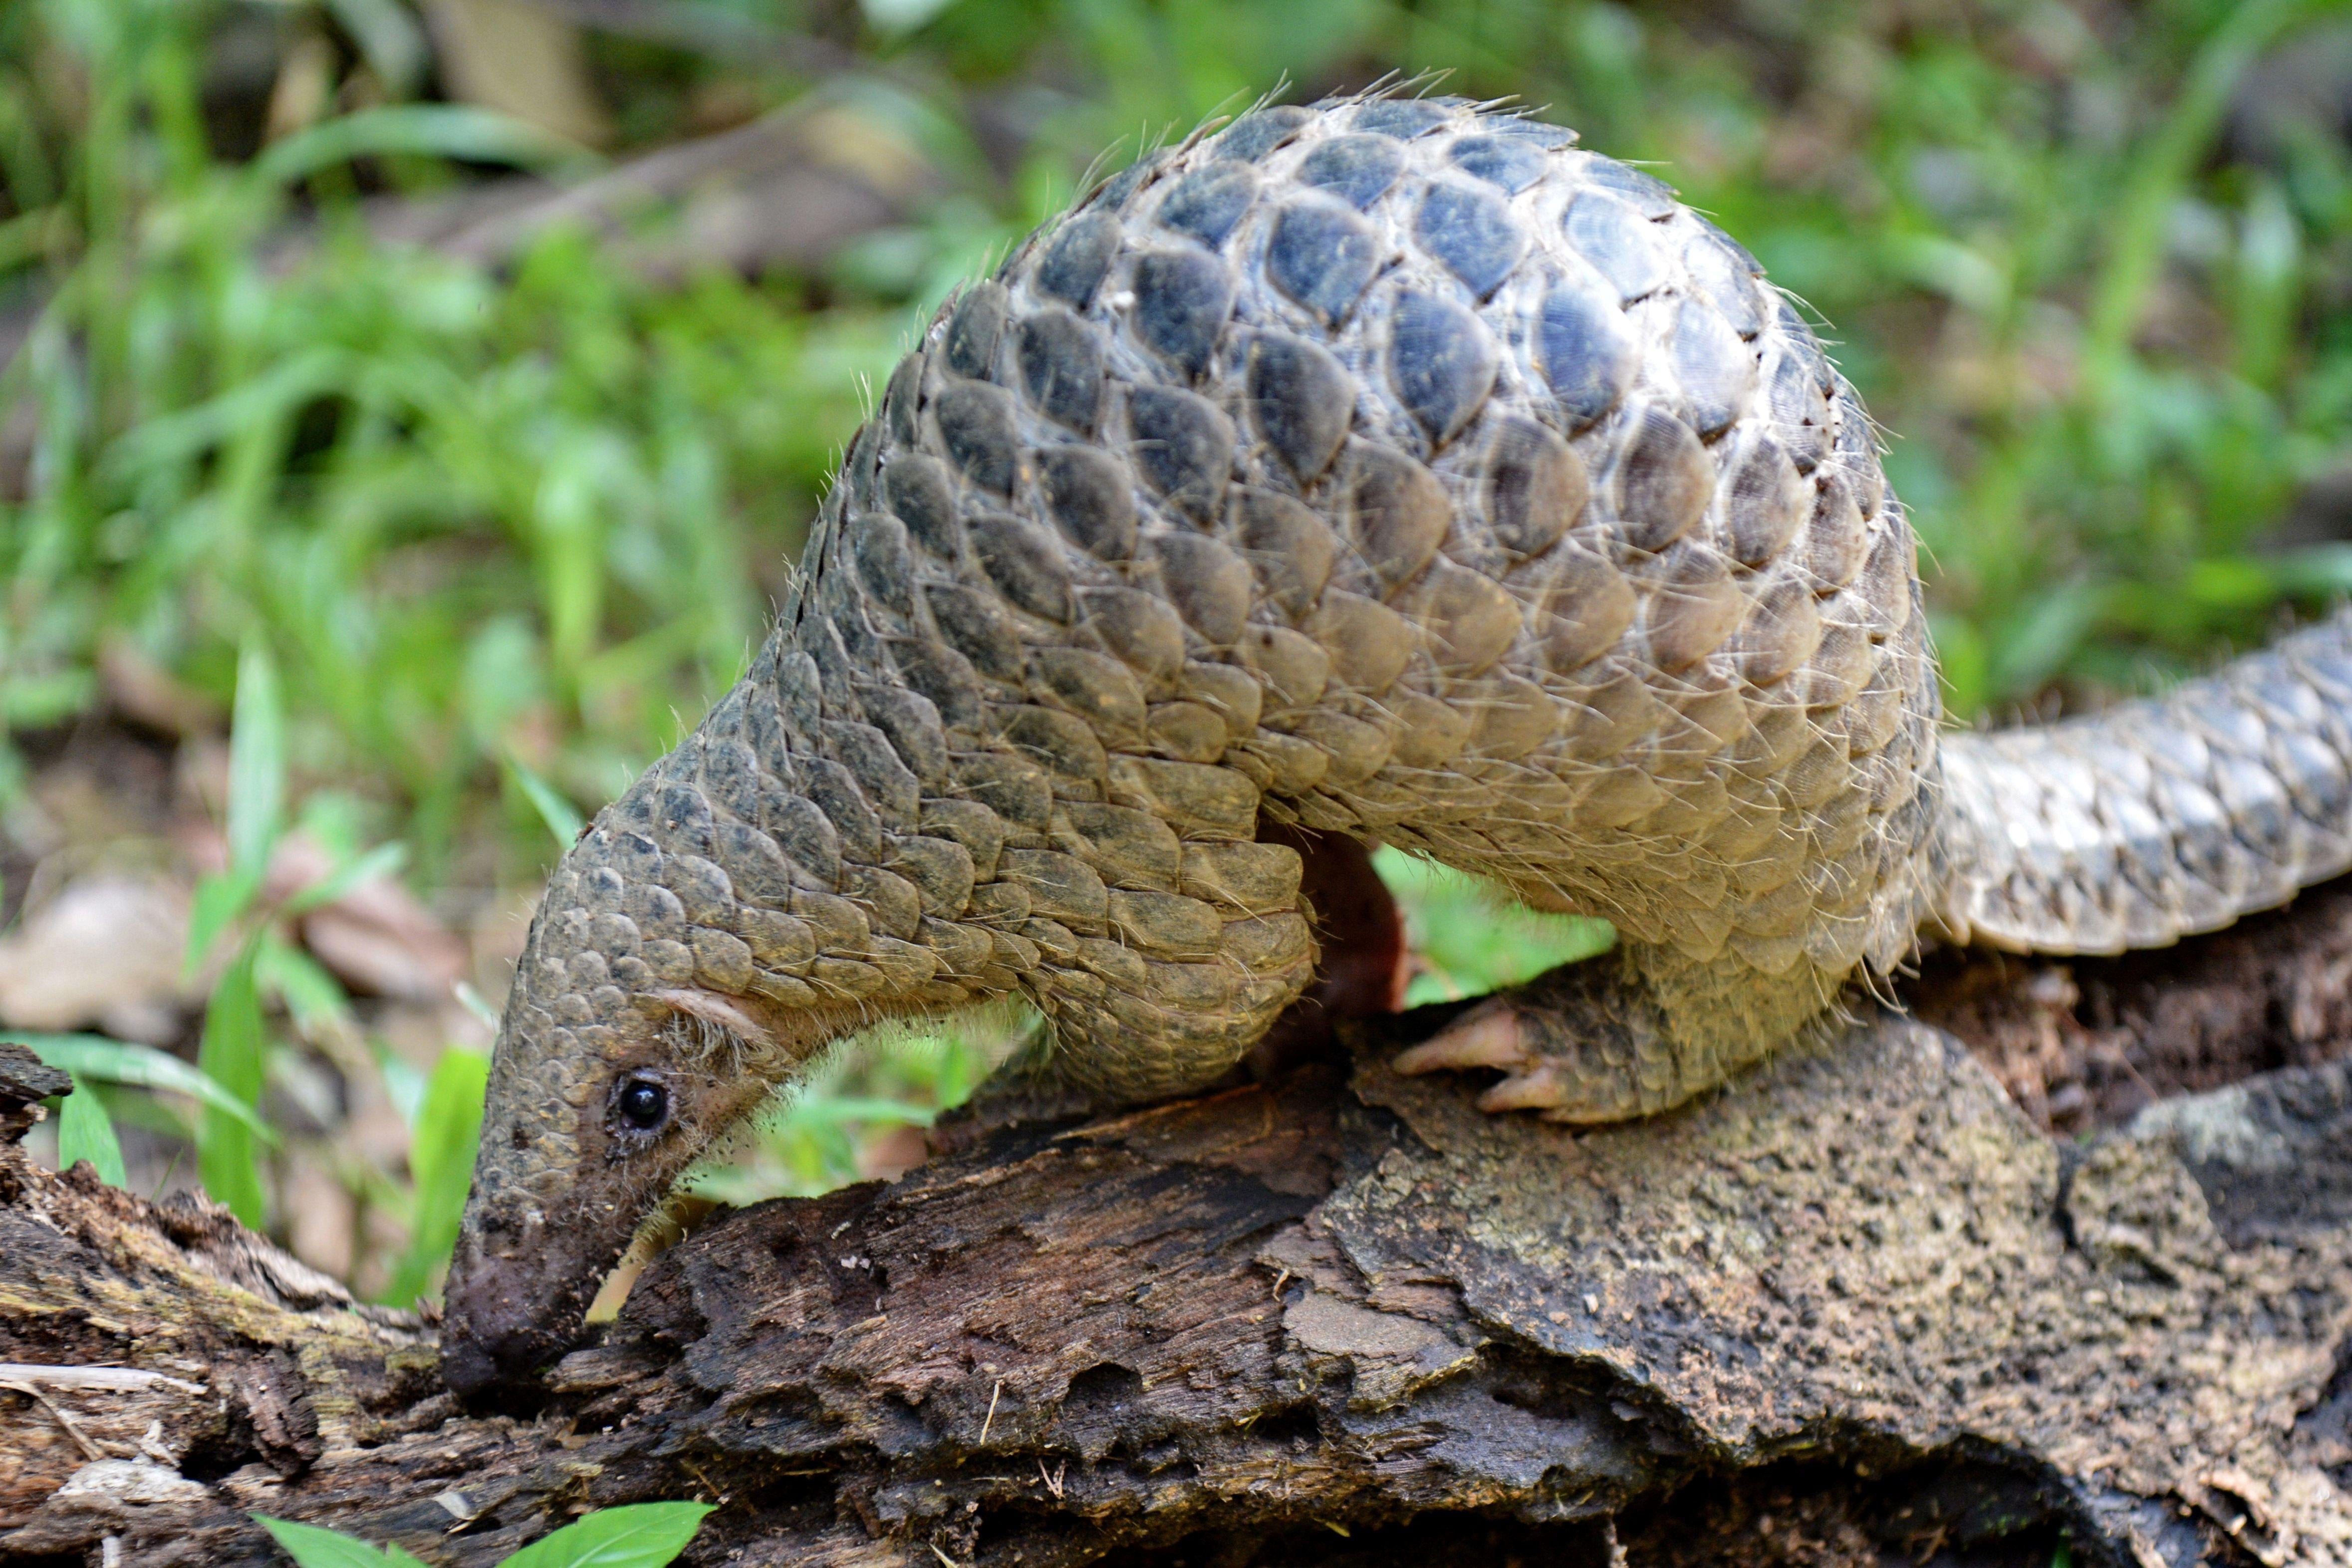 A small pangolin (also known as a scaly anteater). 